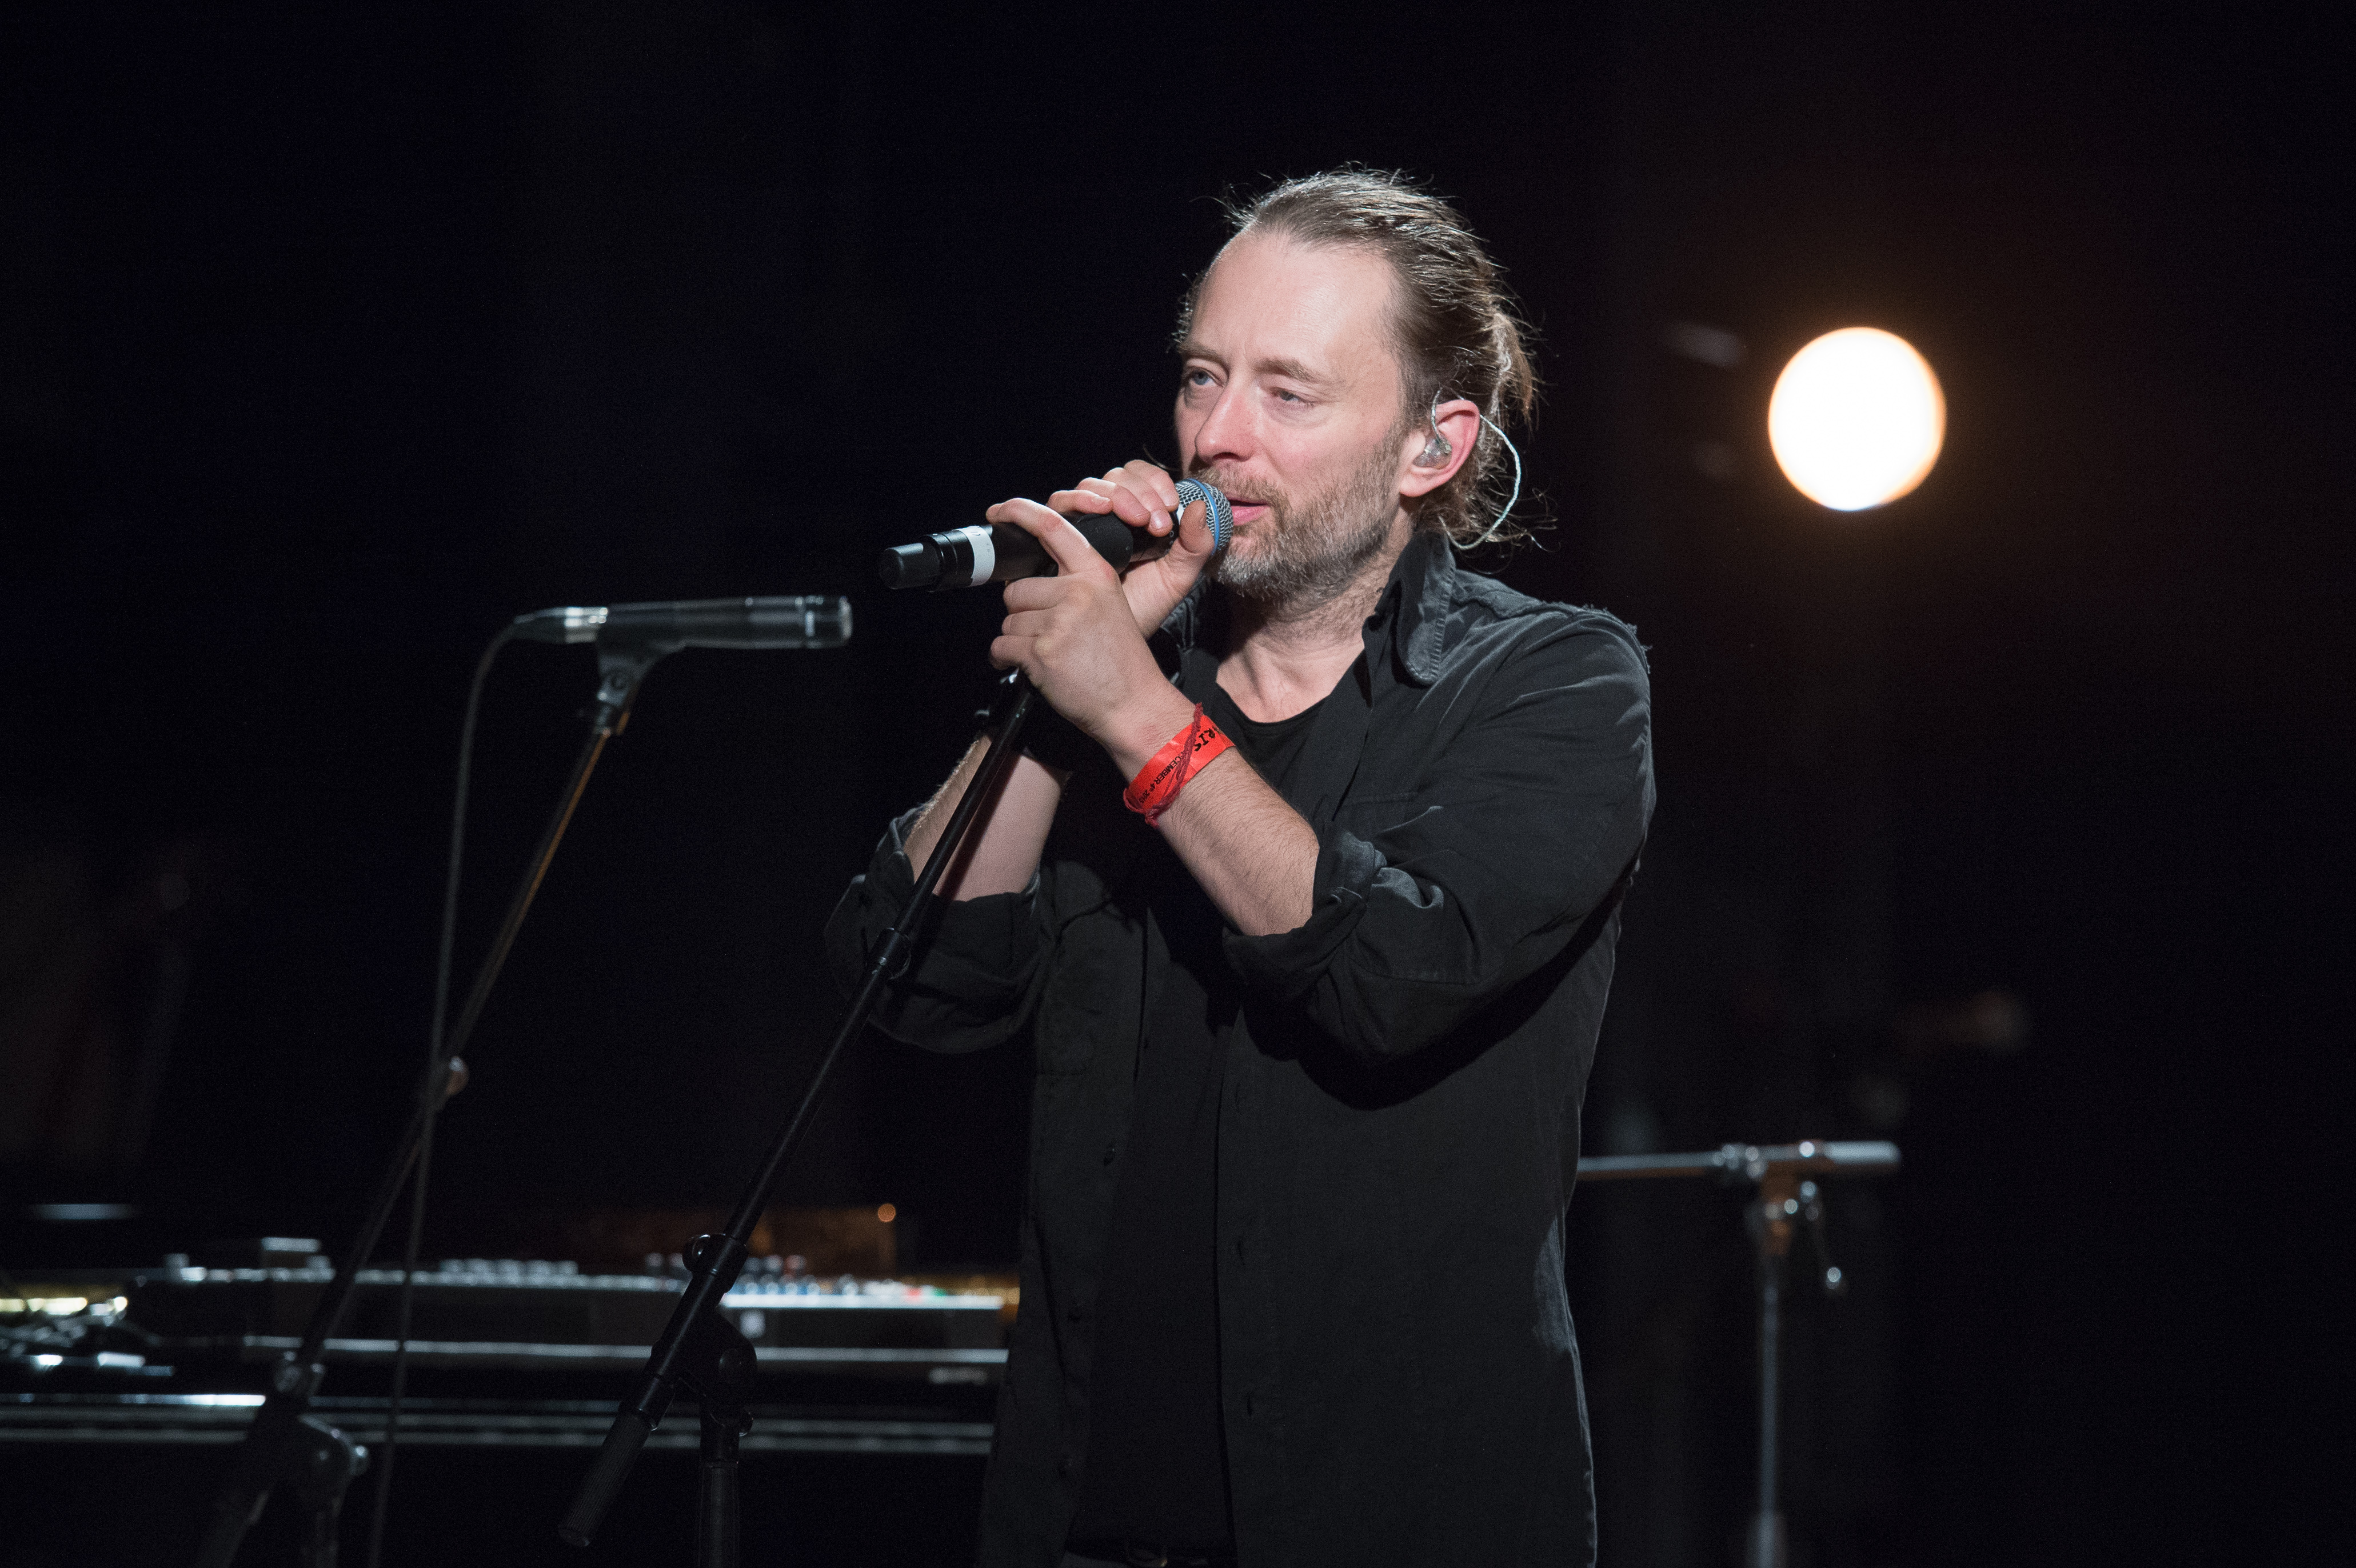 Thom Yorke performs during Pathway to Paris at Le Trianon on December 4, 2015 in Paris, France. (David Wolff - Patrick—Redferns/Getty Images)